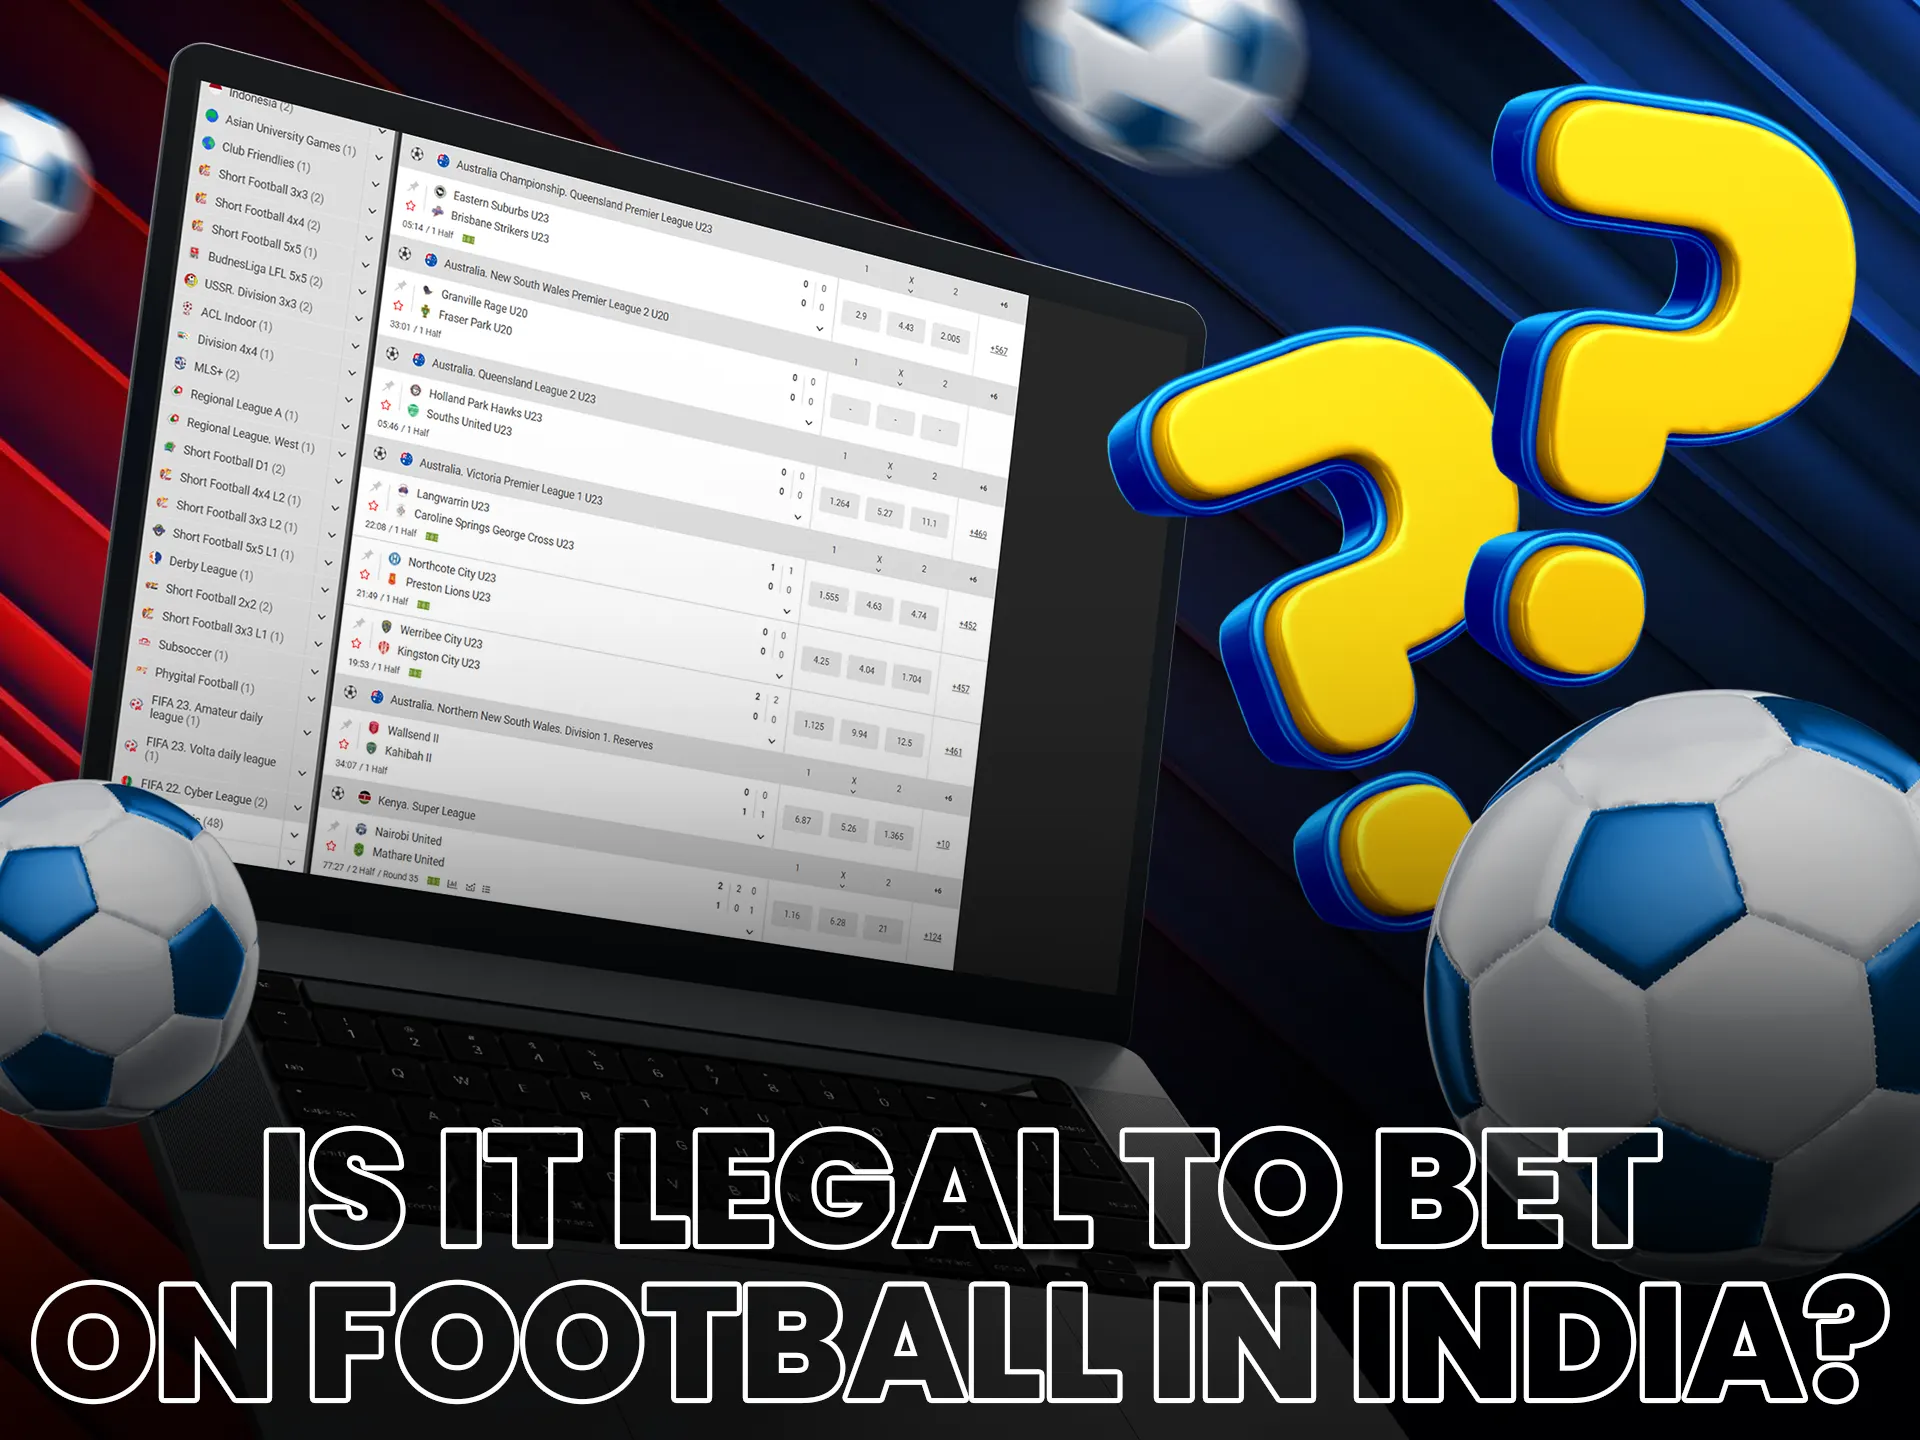 Betting on football in India is legal for all adults.